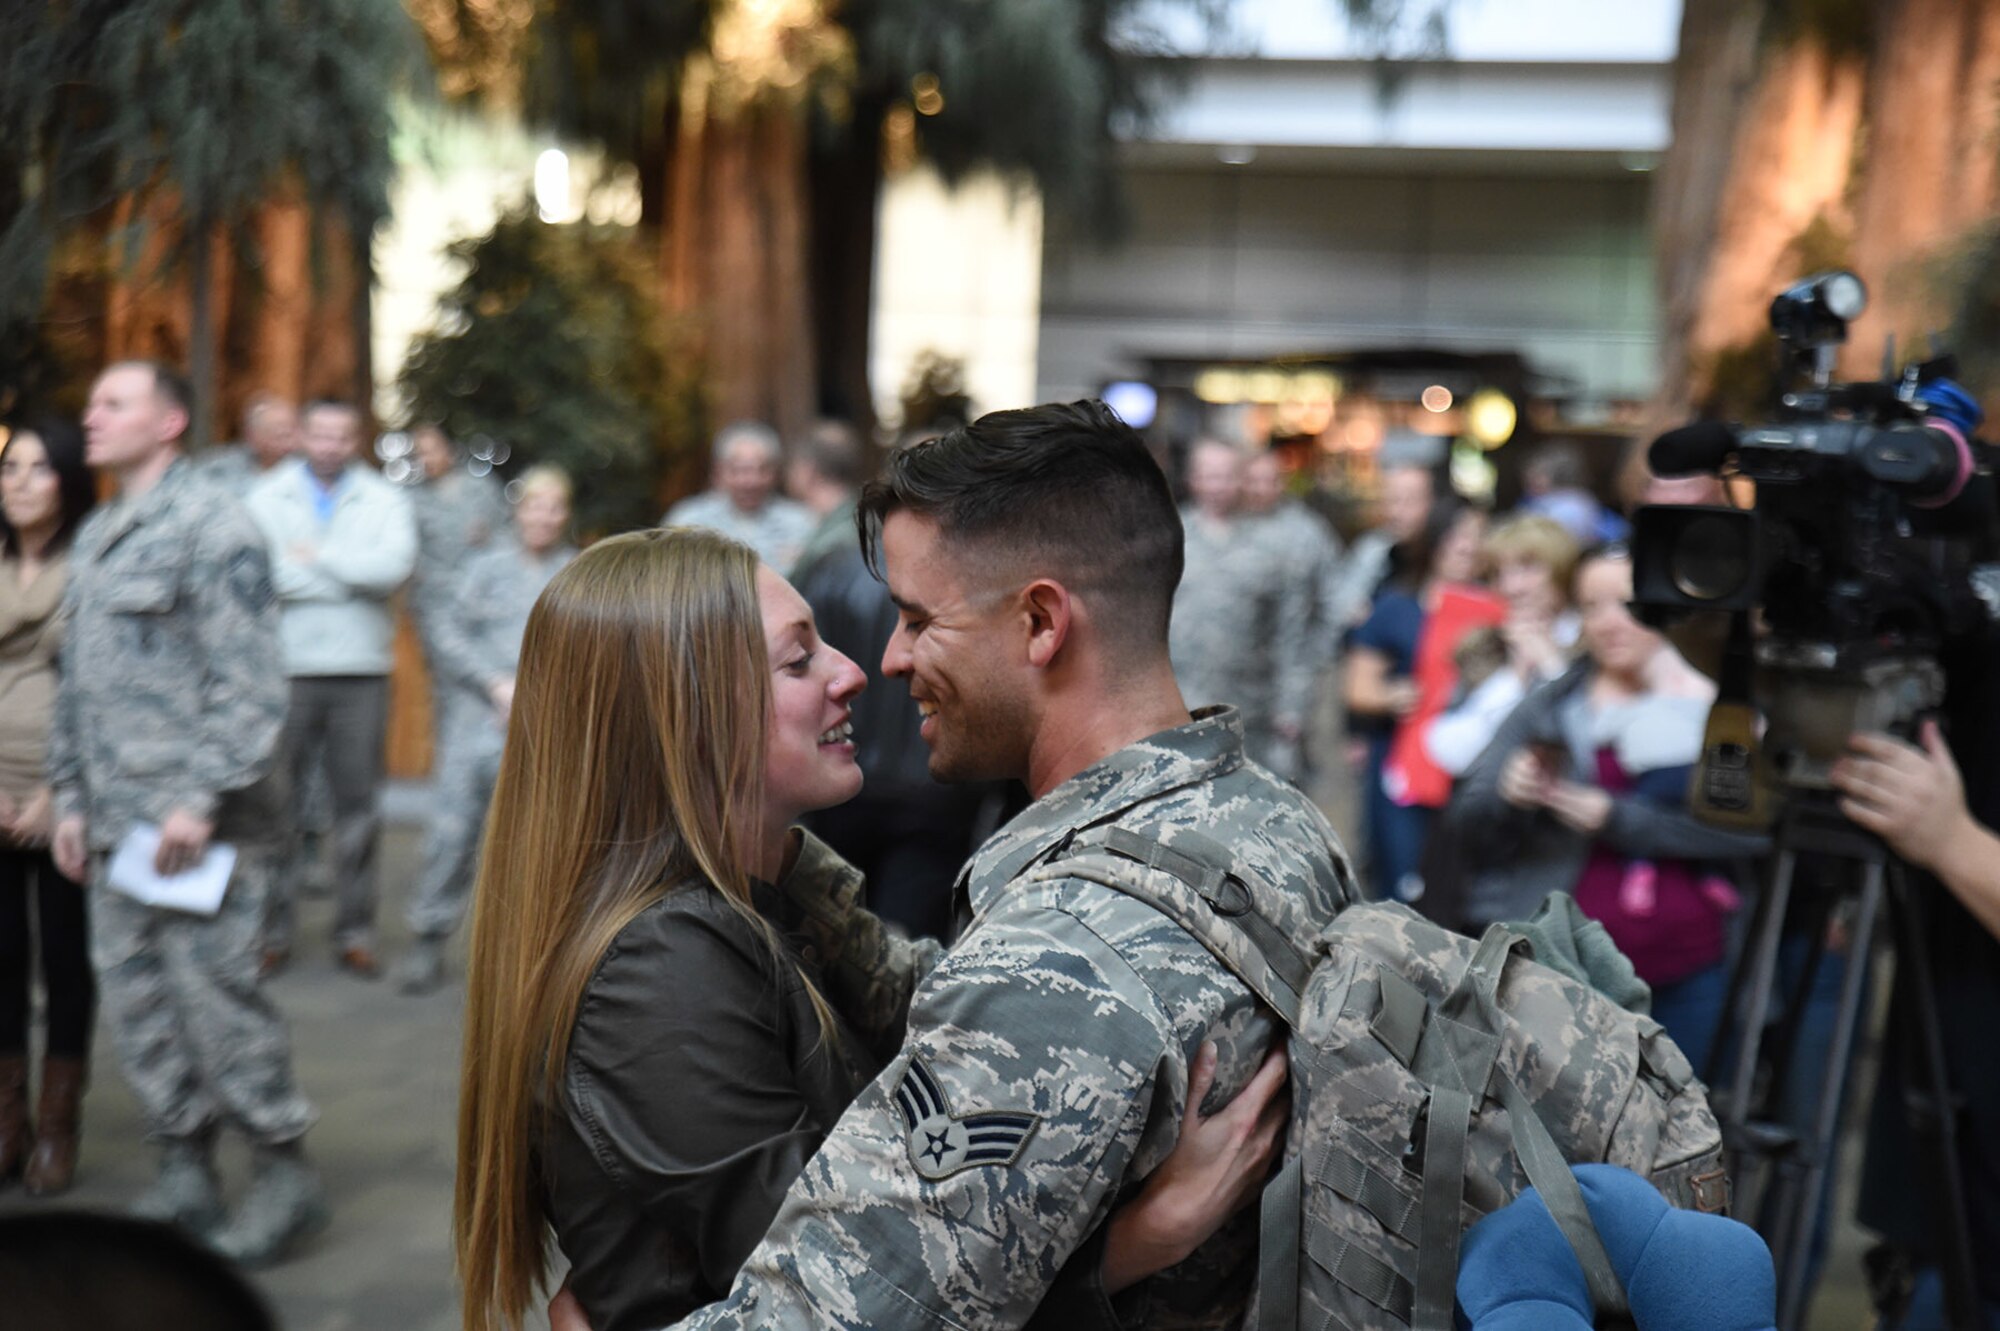 Senior Airman Christopher Gonzales, of the 144th Security Forces Squadron, is welcomed home by Megan Woodby at the Fresno Yosemite International Airport, Calif., Jan. 21, 2016. Gonzales was deployed for more than seven months in support of Operation Freedom’s Sentinel. (U.S. Air National Guard photo/Senior Master Sgt. Chris Drudge)